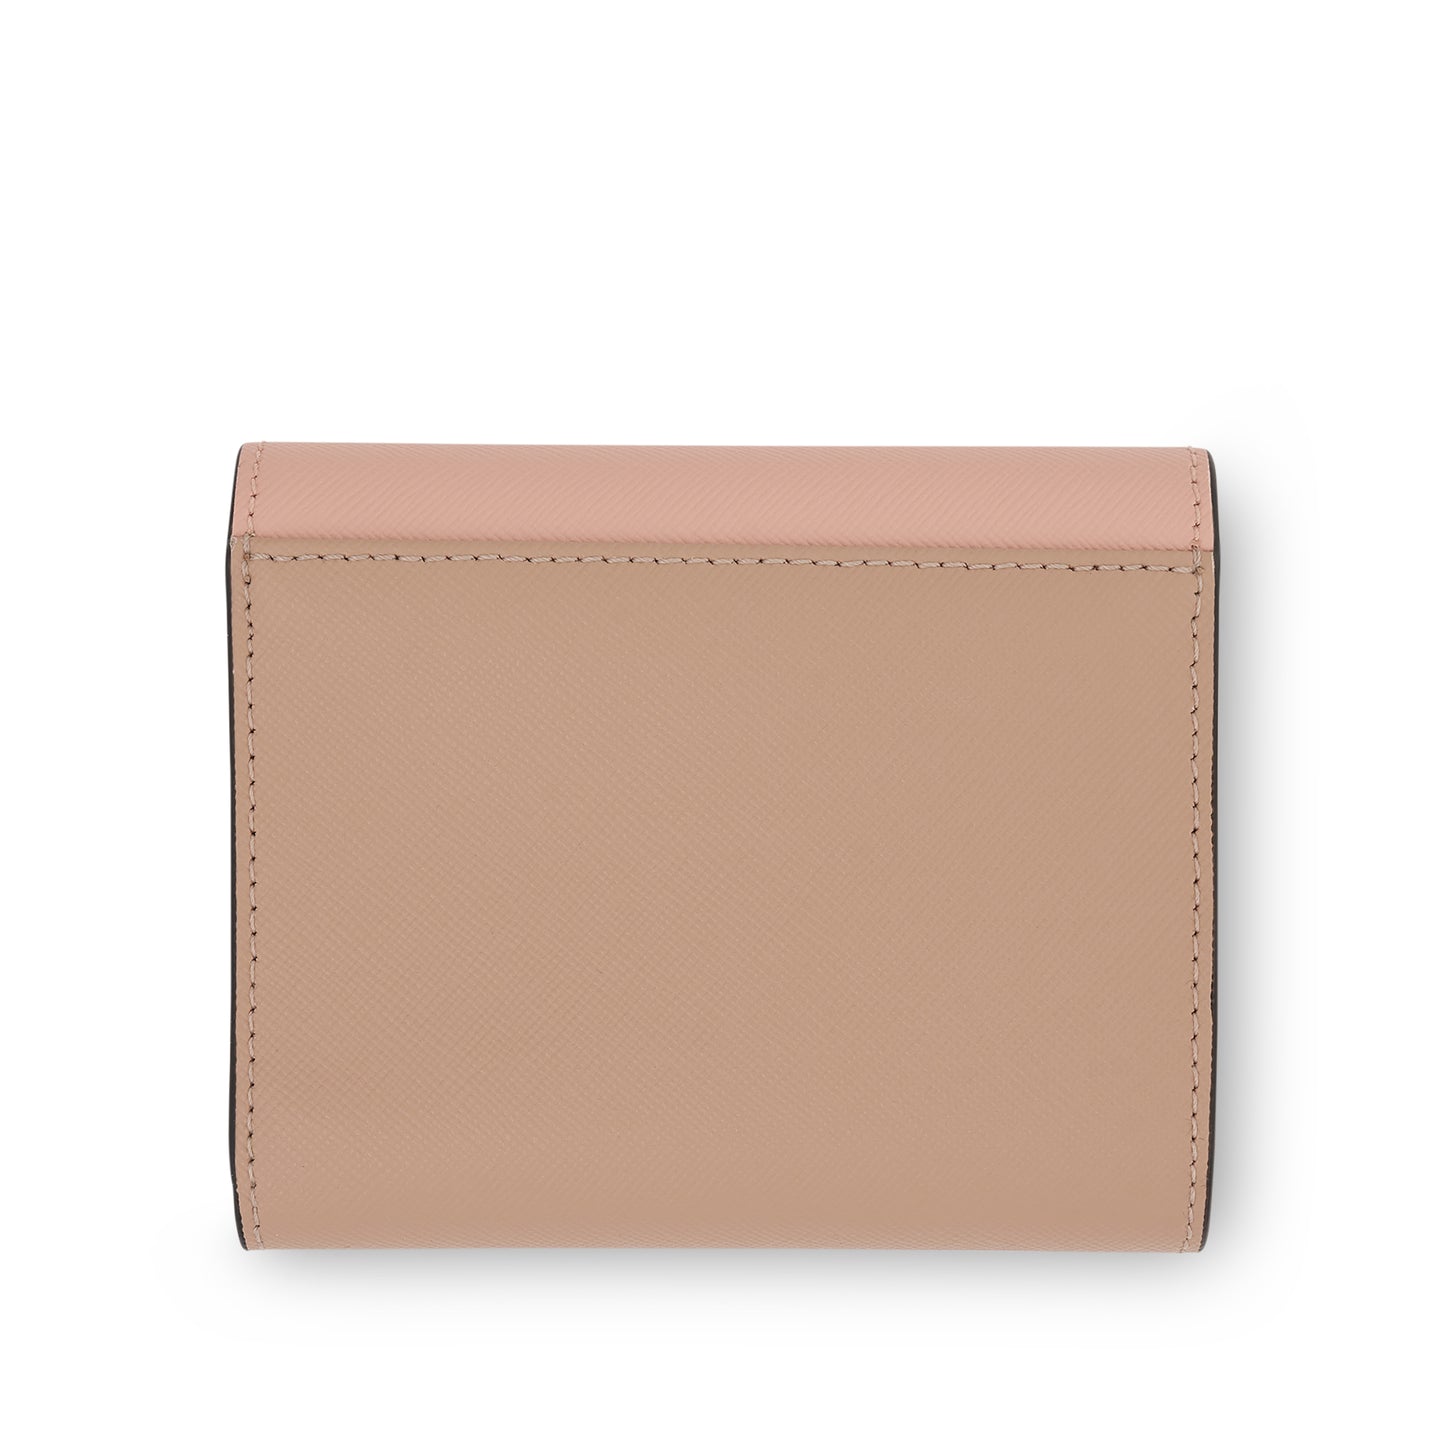 Logo Squared Flap Wallet in Camellia/Talc